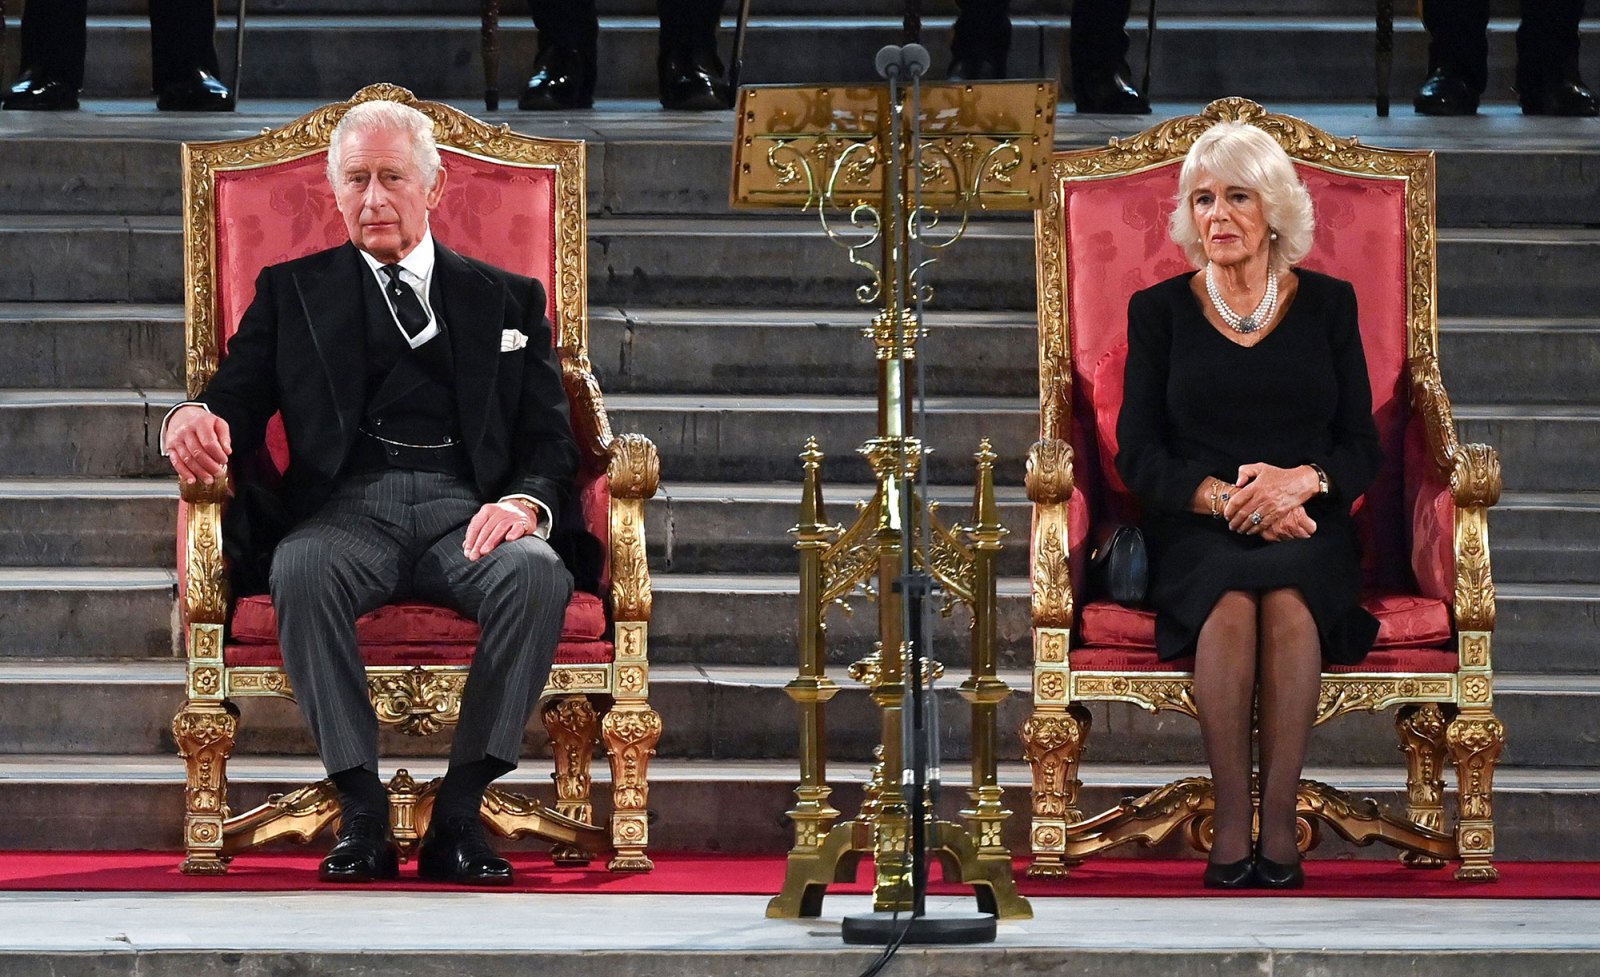 King Charles III and Camilla Queen Consort Sit on the Throne for the 1st Time During Parliament Address